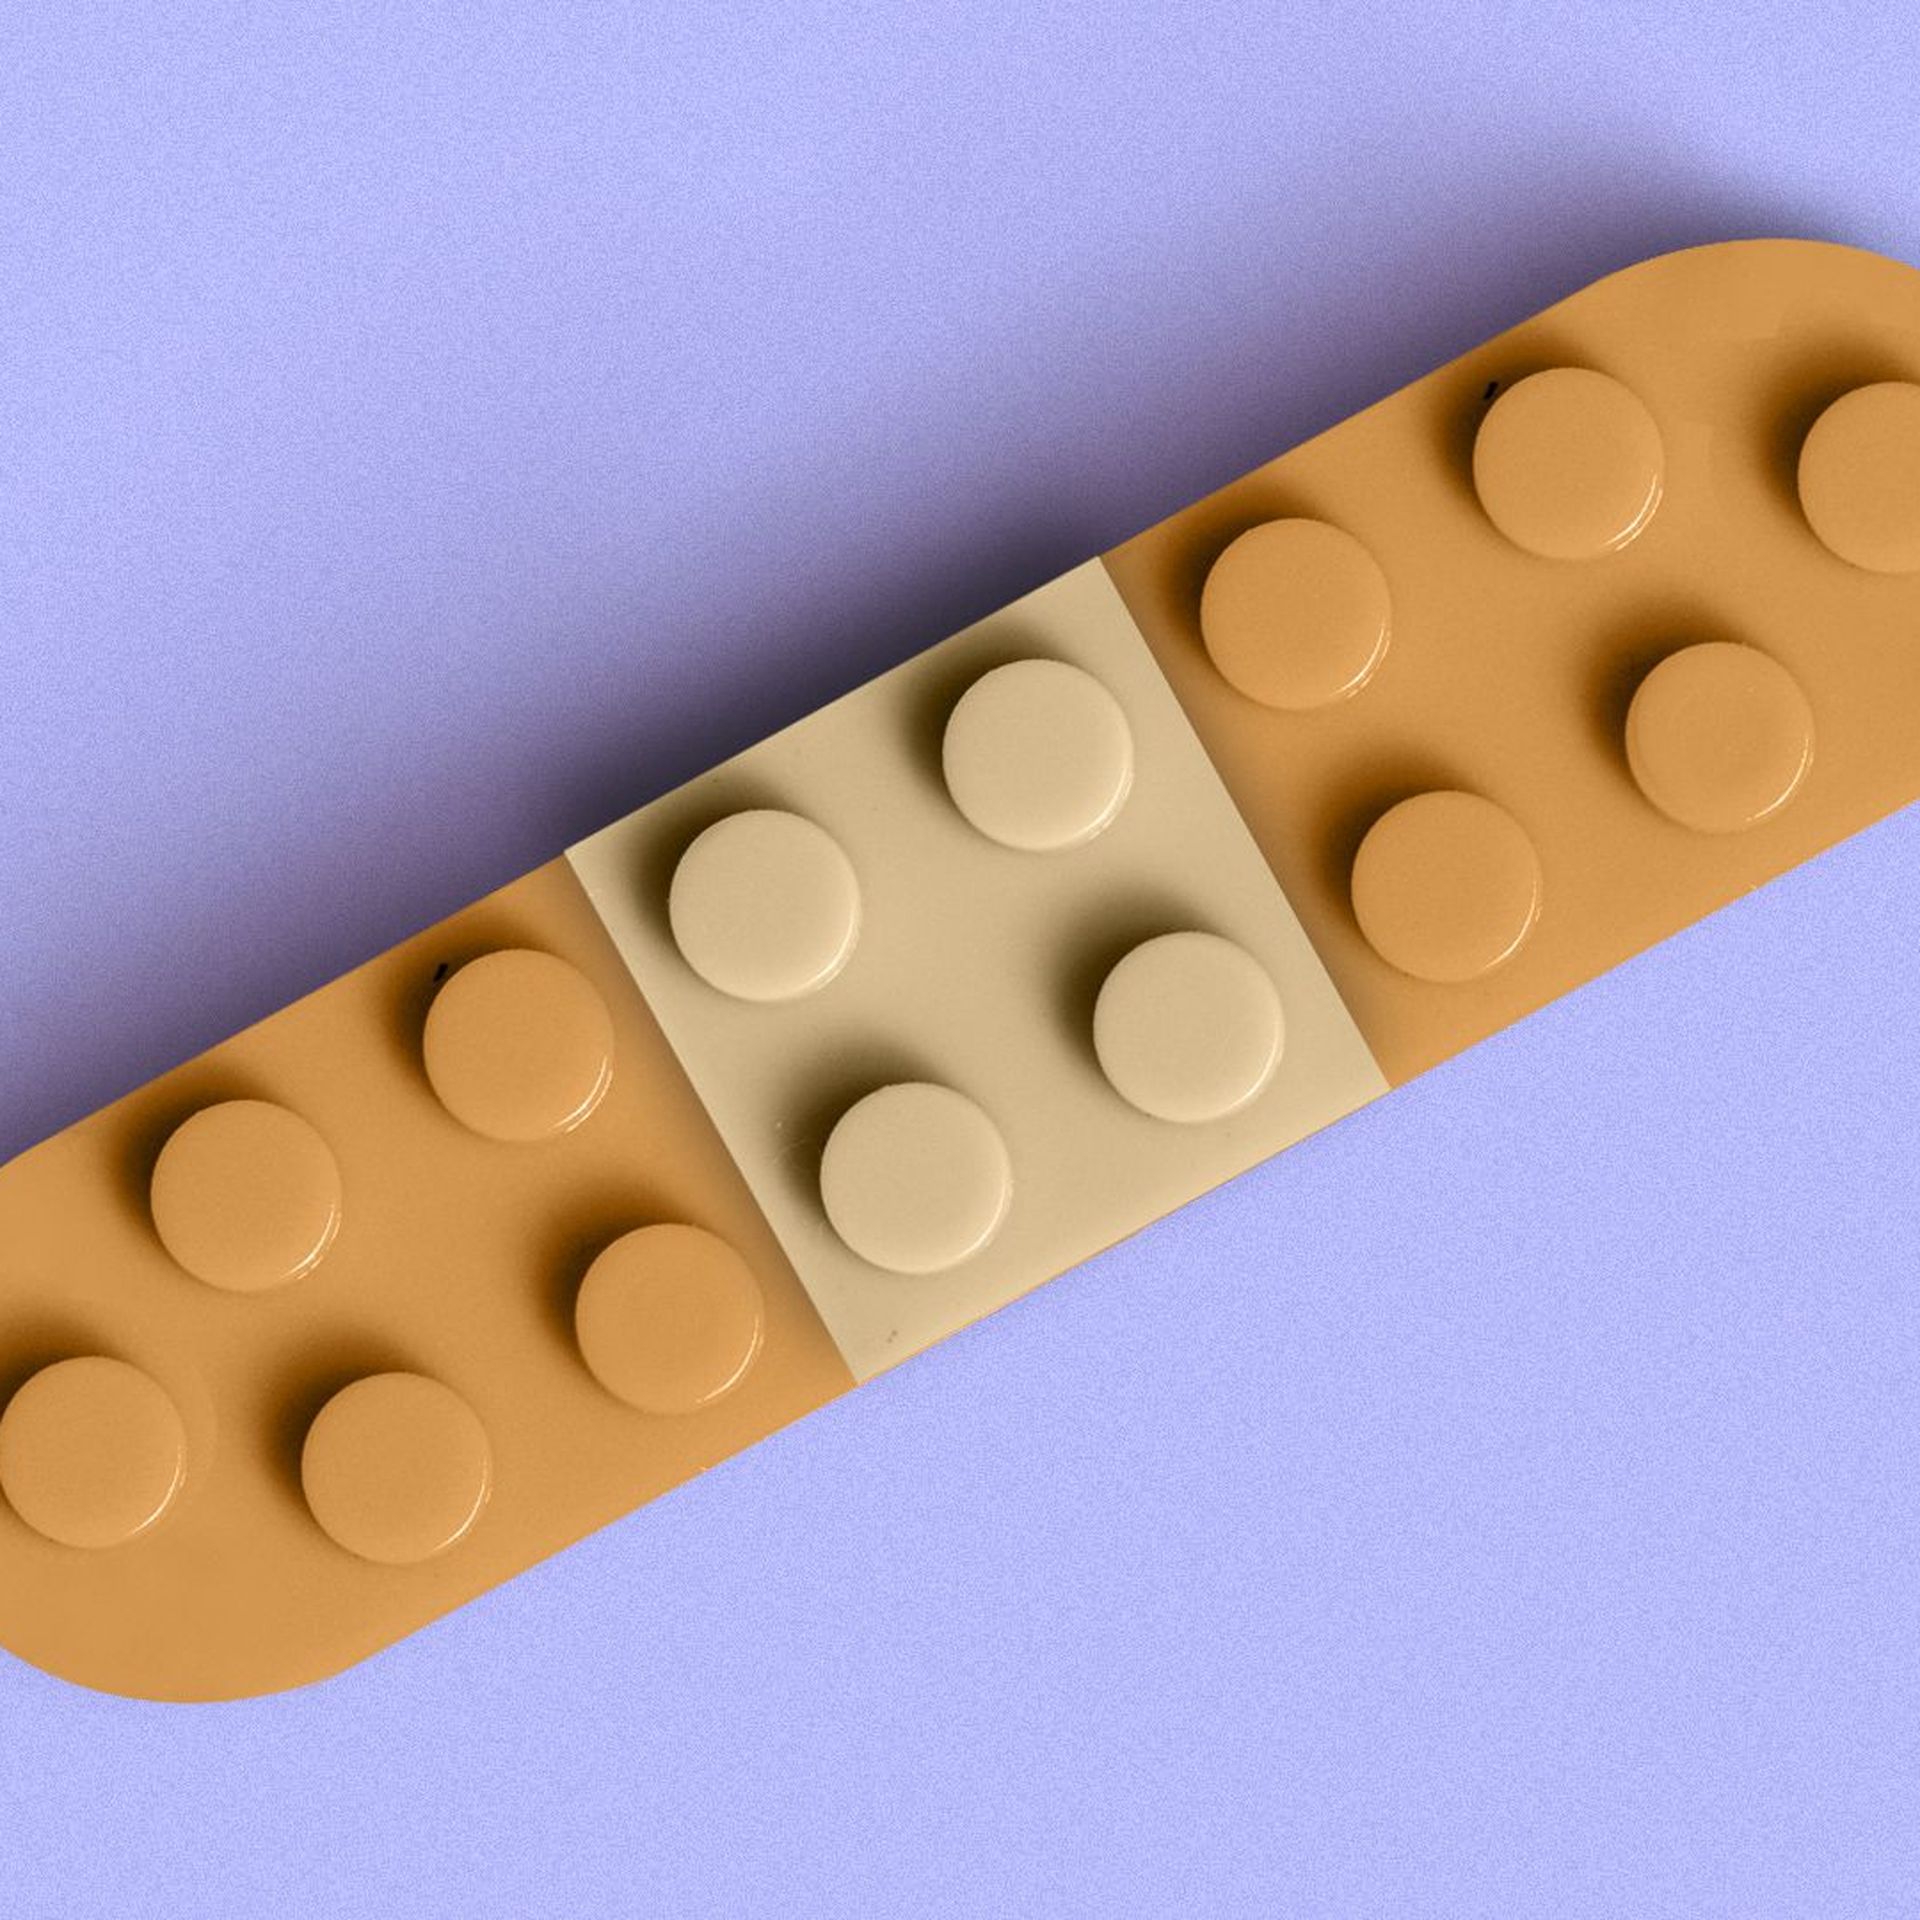 Illustration of a bandaid made out of lego blocks.